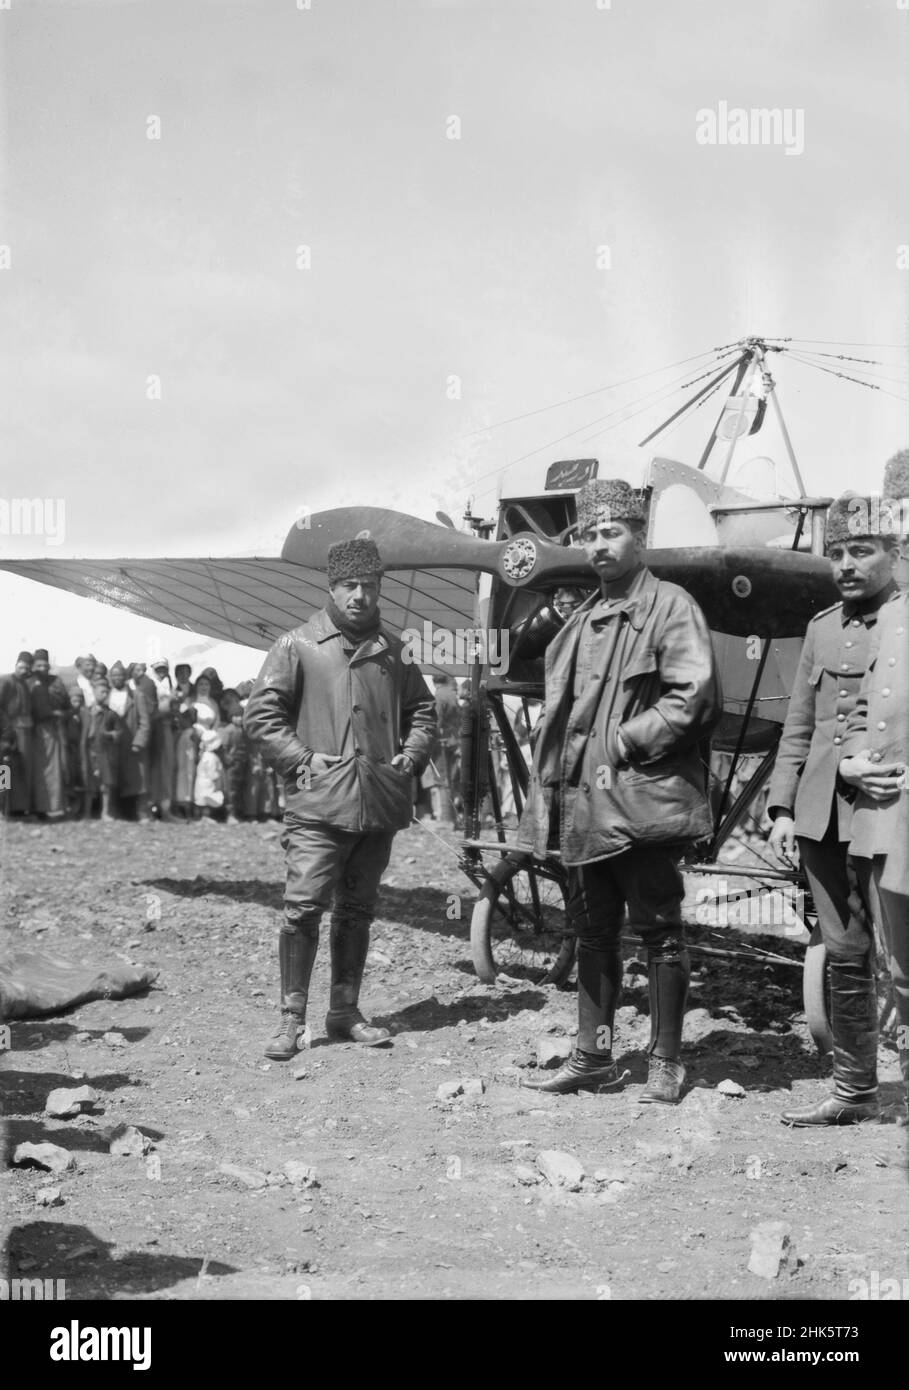 Vintage photo dated May 1, 1914 of the pioneering Turkish aviators Captain Salim bey and Captain Kemal Bey and their Bleriot XI airplane in Jerusalem, Palestine May 1, 1914.  The photo was taken during their attempt to be the first to fly between Istanbul and Alexandria, Egypt. Stock Photo